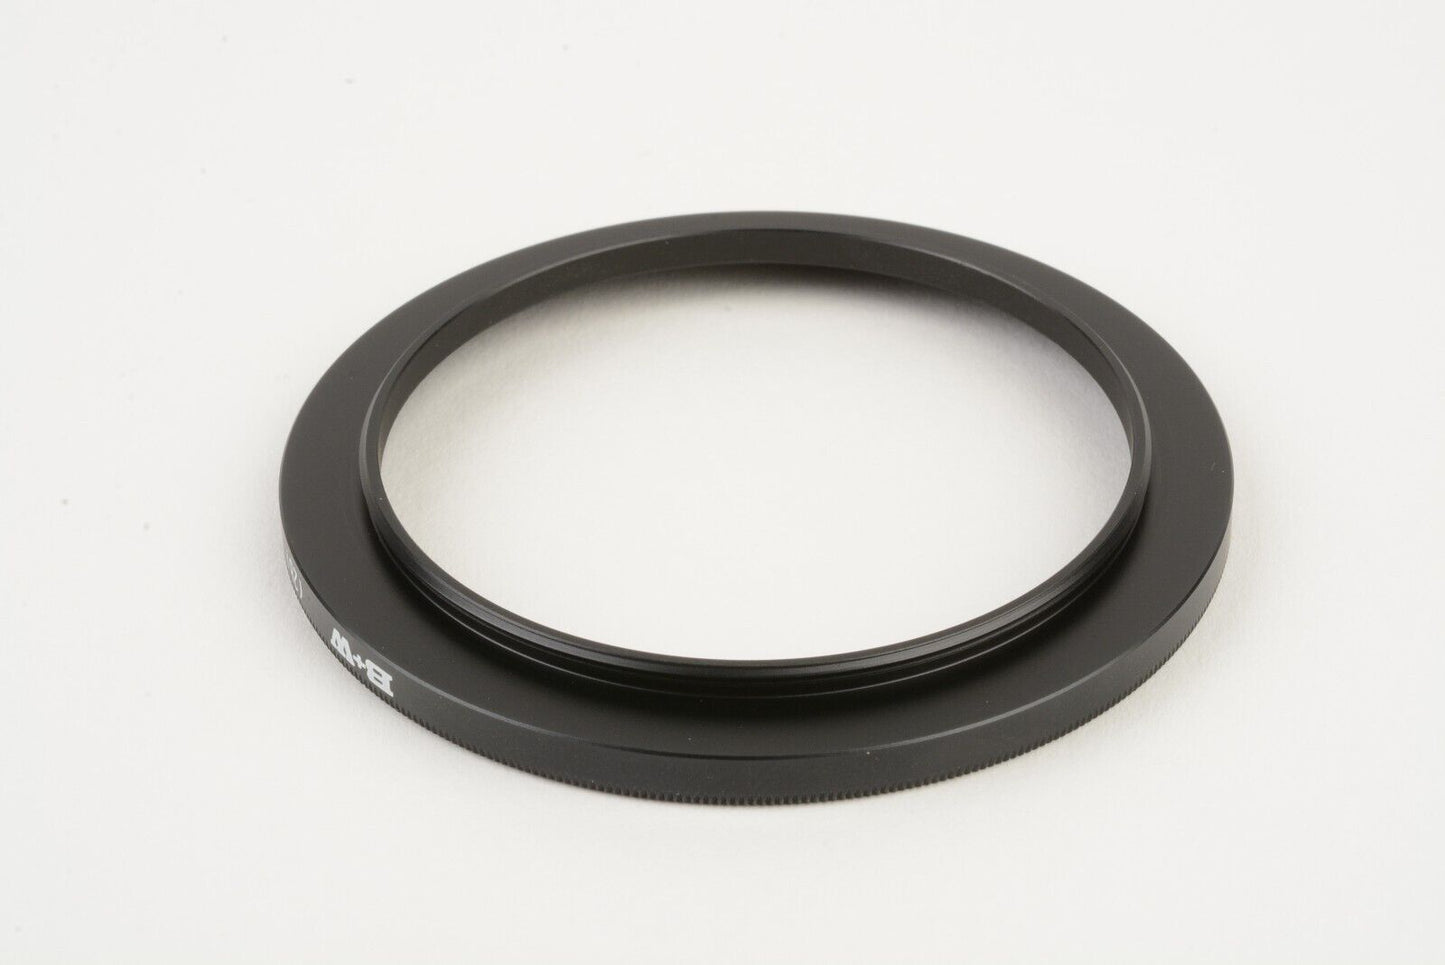 MINT B+W STEP-UP ADAPTER RING  52mm TO 58mm THREAD #65-069459 IN CASE